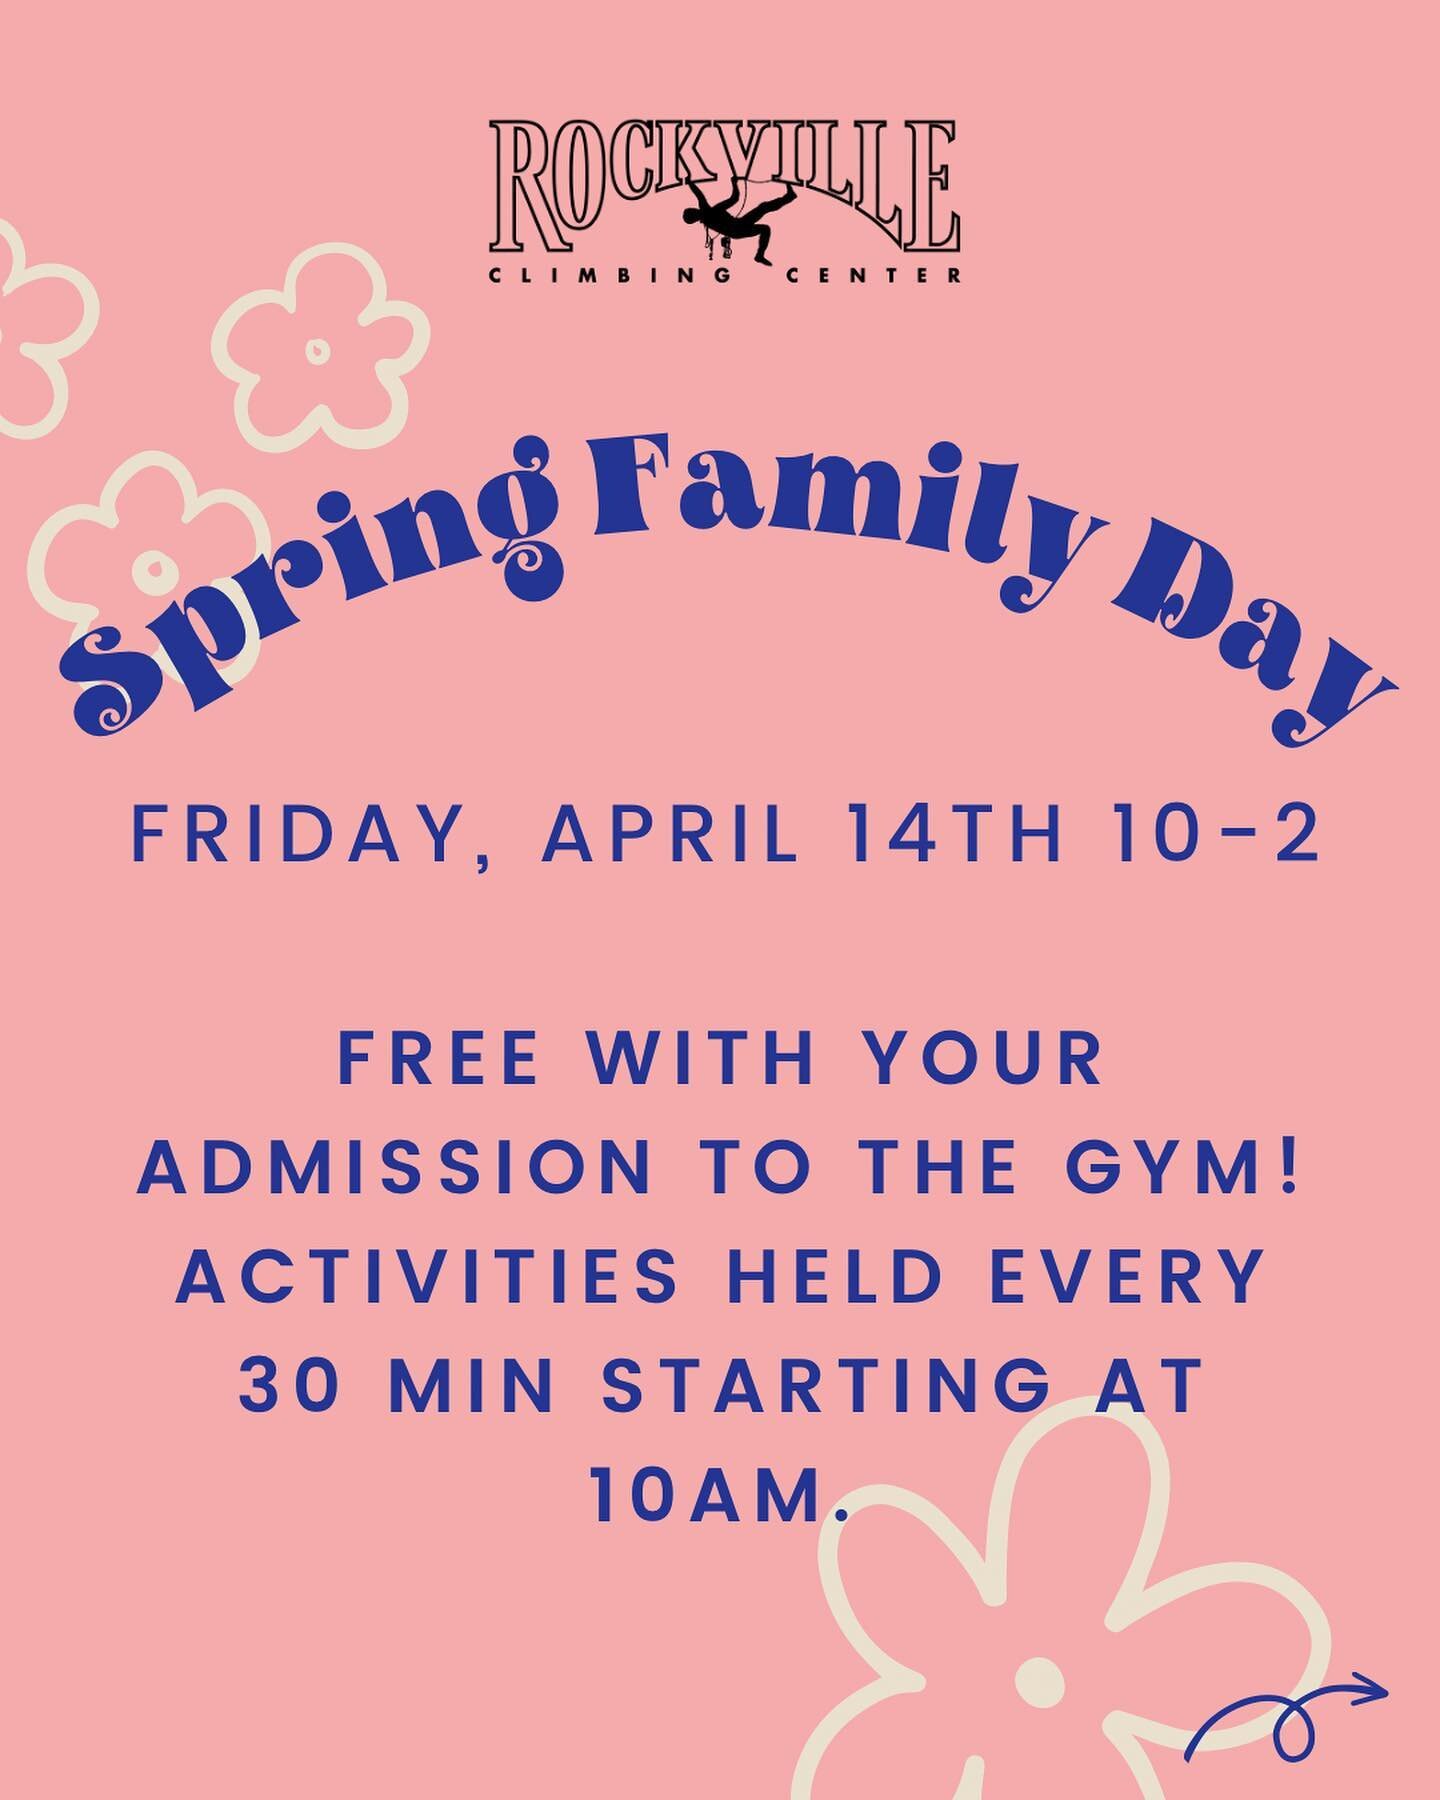 Kids 6 and up (including adults!) will have the chance to try out some additional climbing activities during our first ever Spring Family Day event this Friday, April 14th from 10-2! 
🌸
Learn about climbing techniques and knots through games and ins